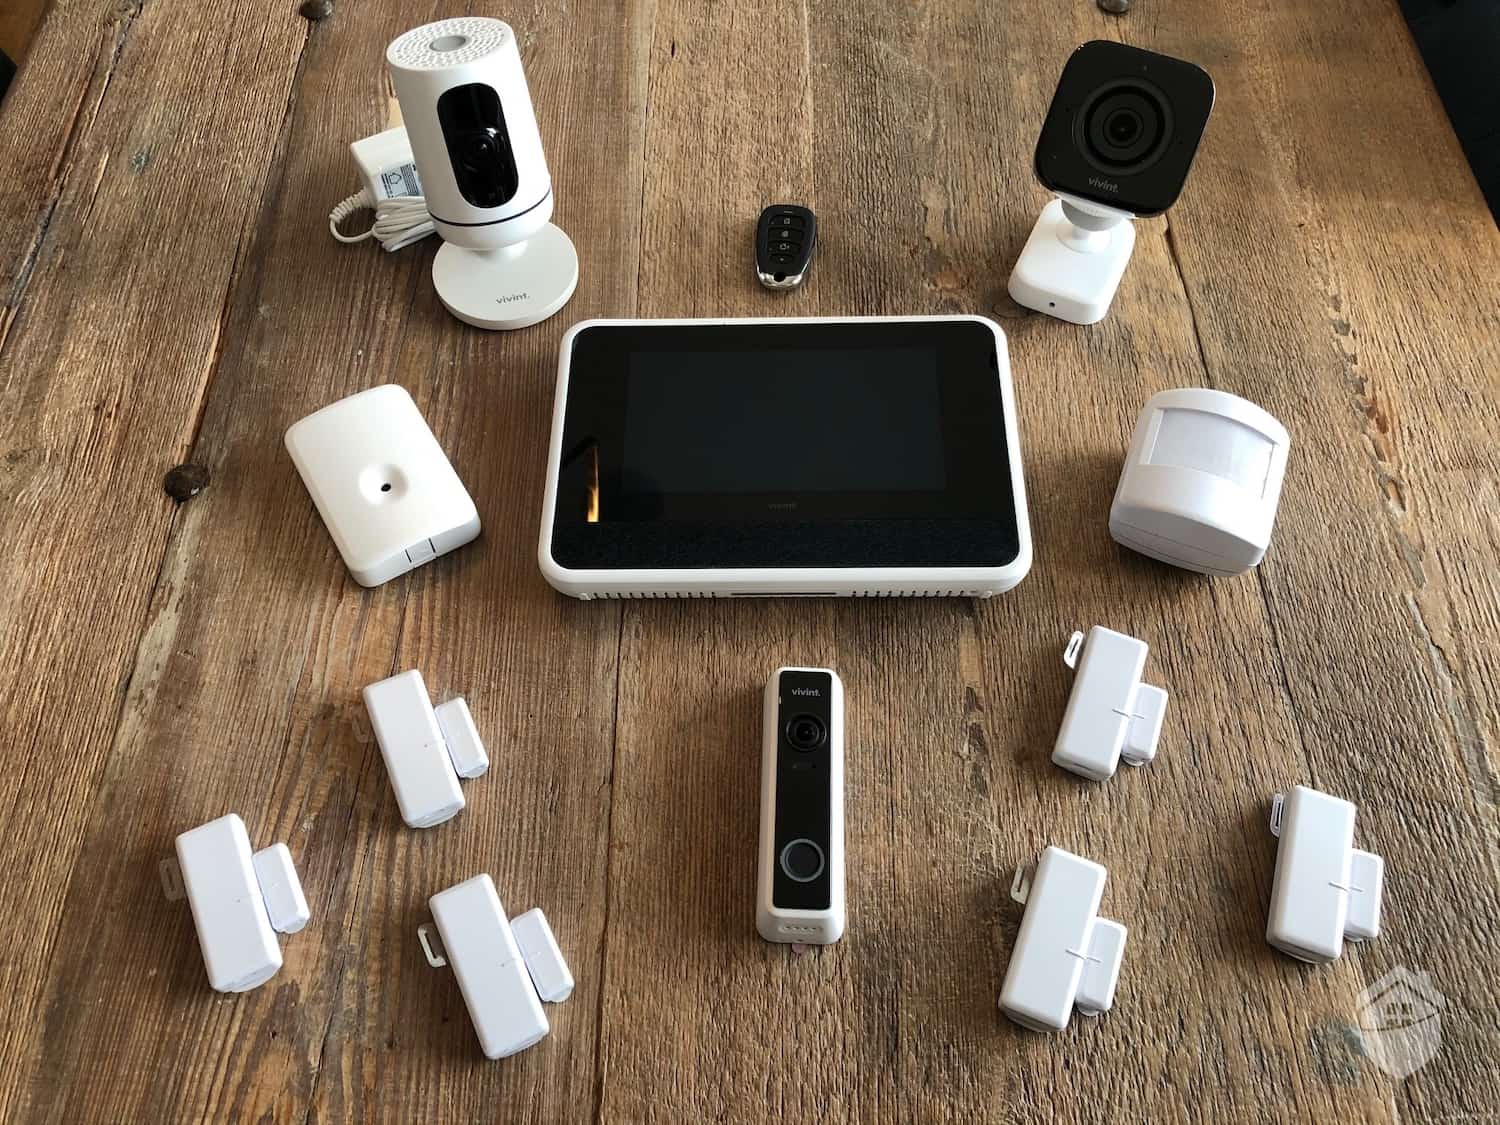 Smart Alarm System with Camera